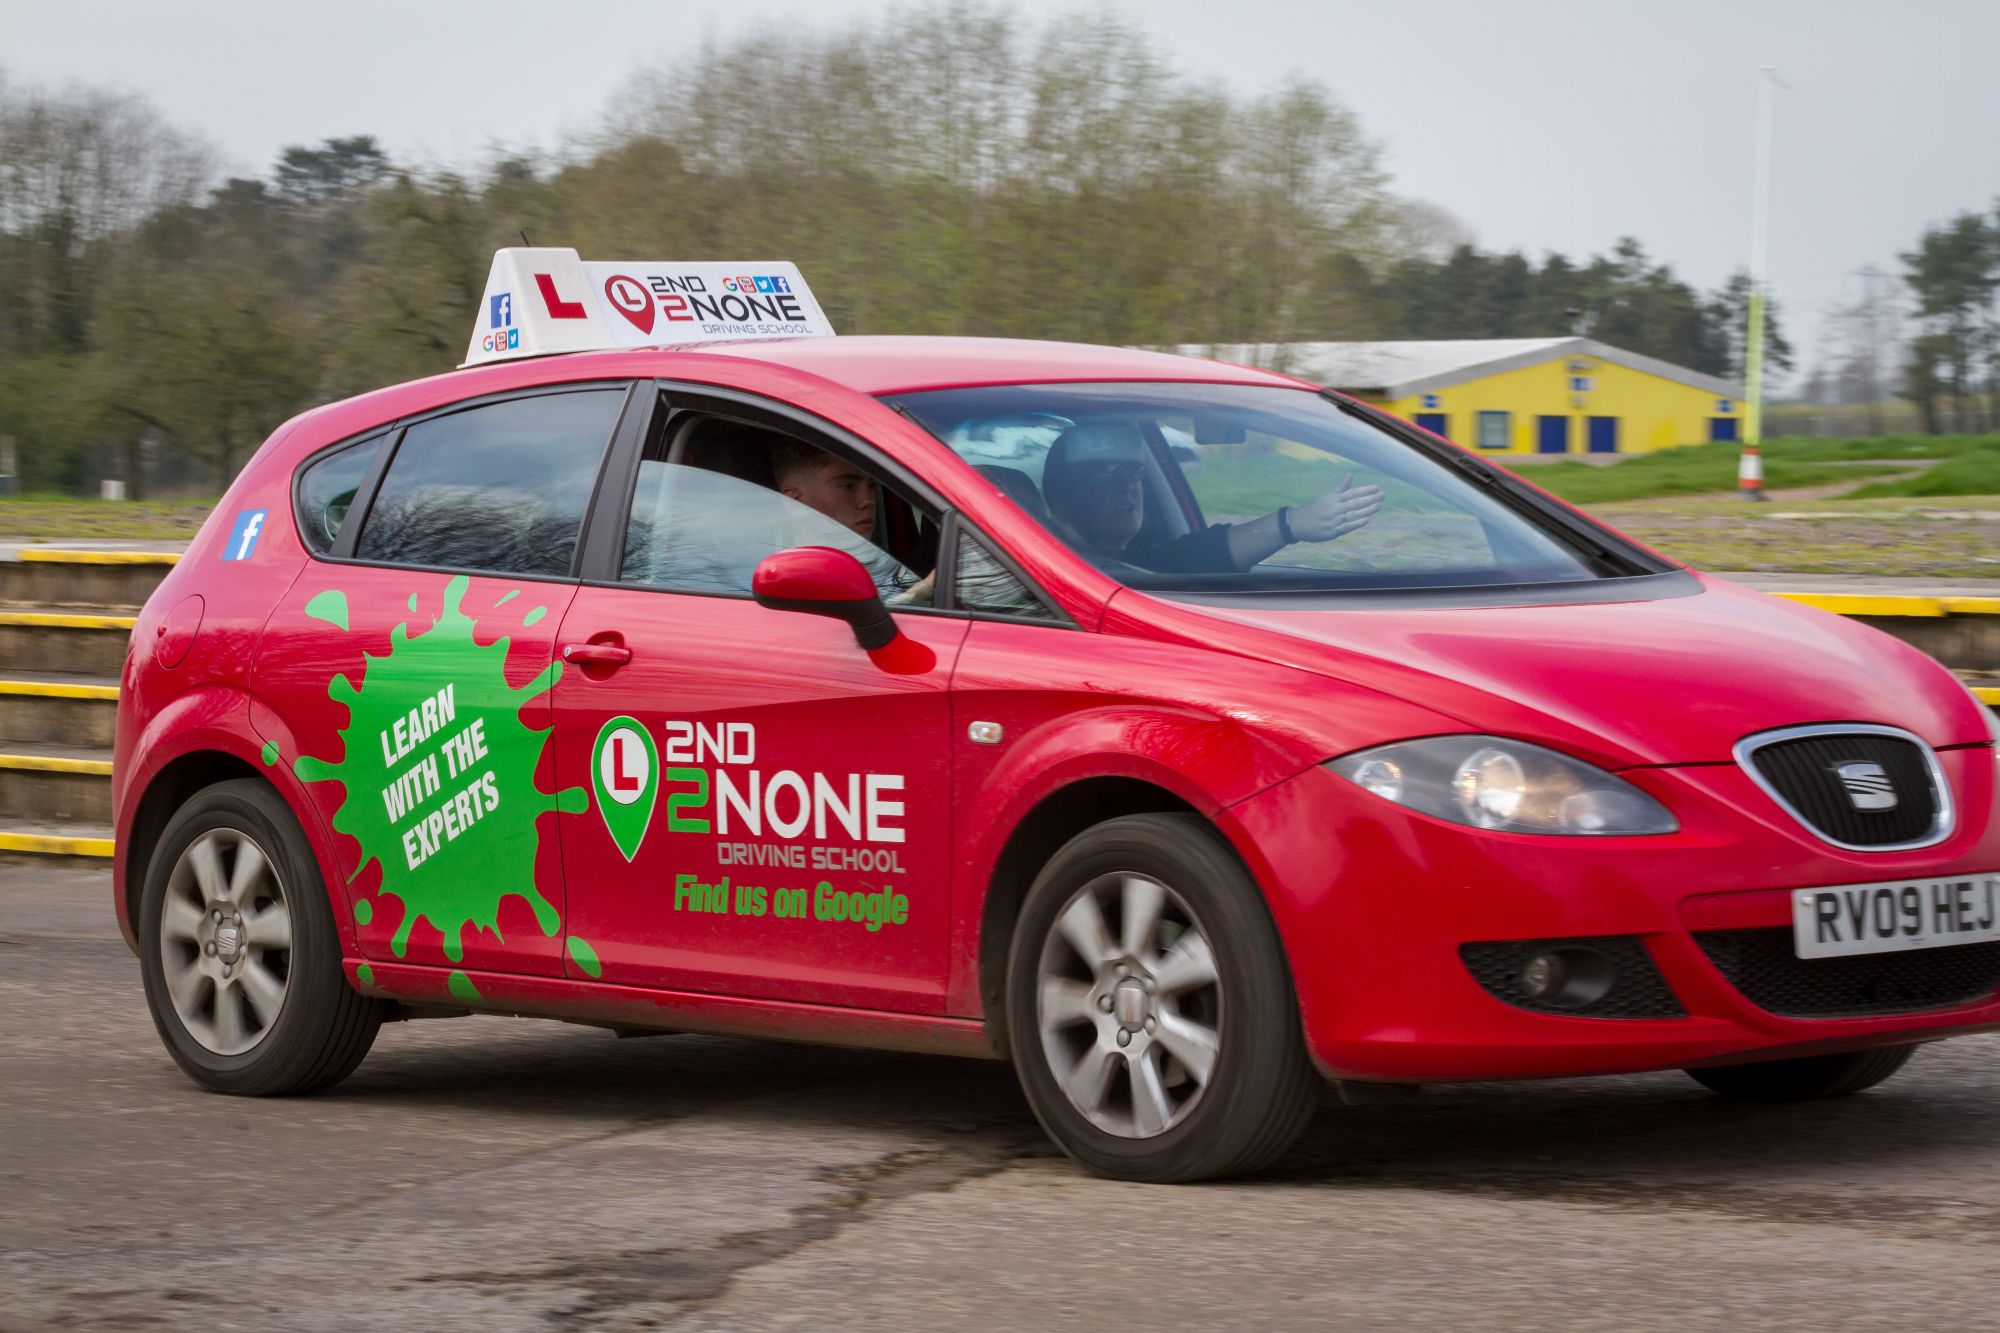 Under 17's Driving Lessons Shepton Mallet